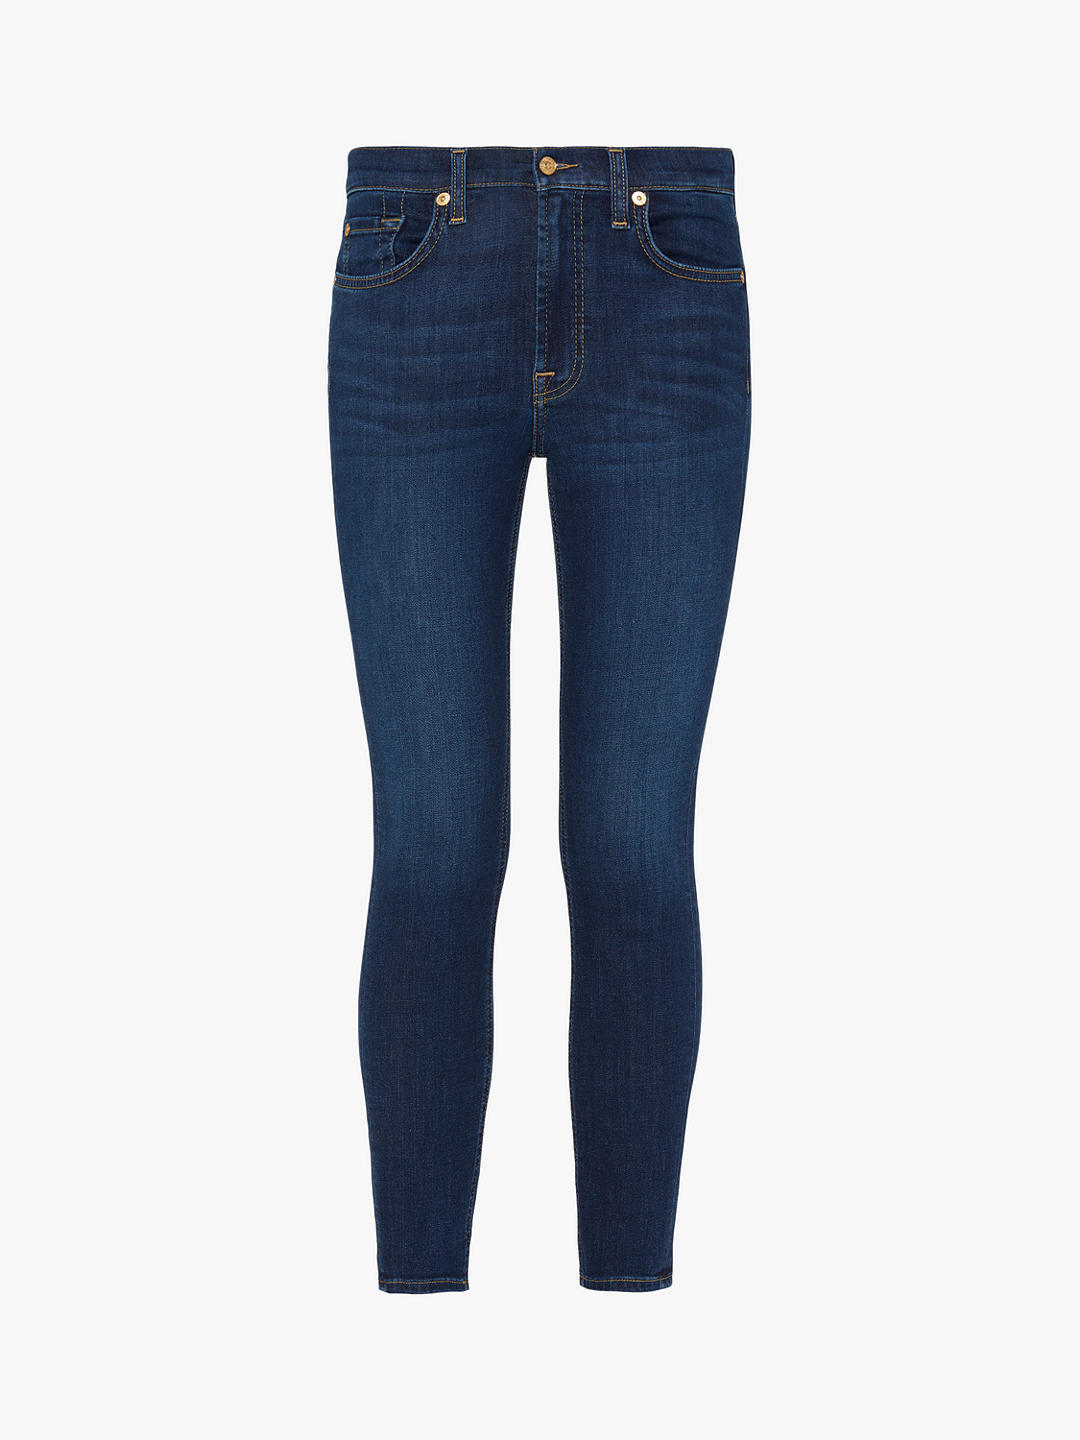 7 For All Mankind Skinny B(Air) Jeans, Rinsed Indigo